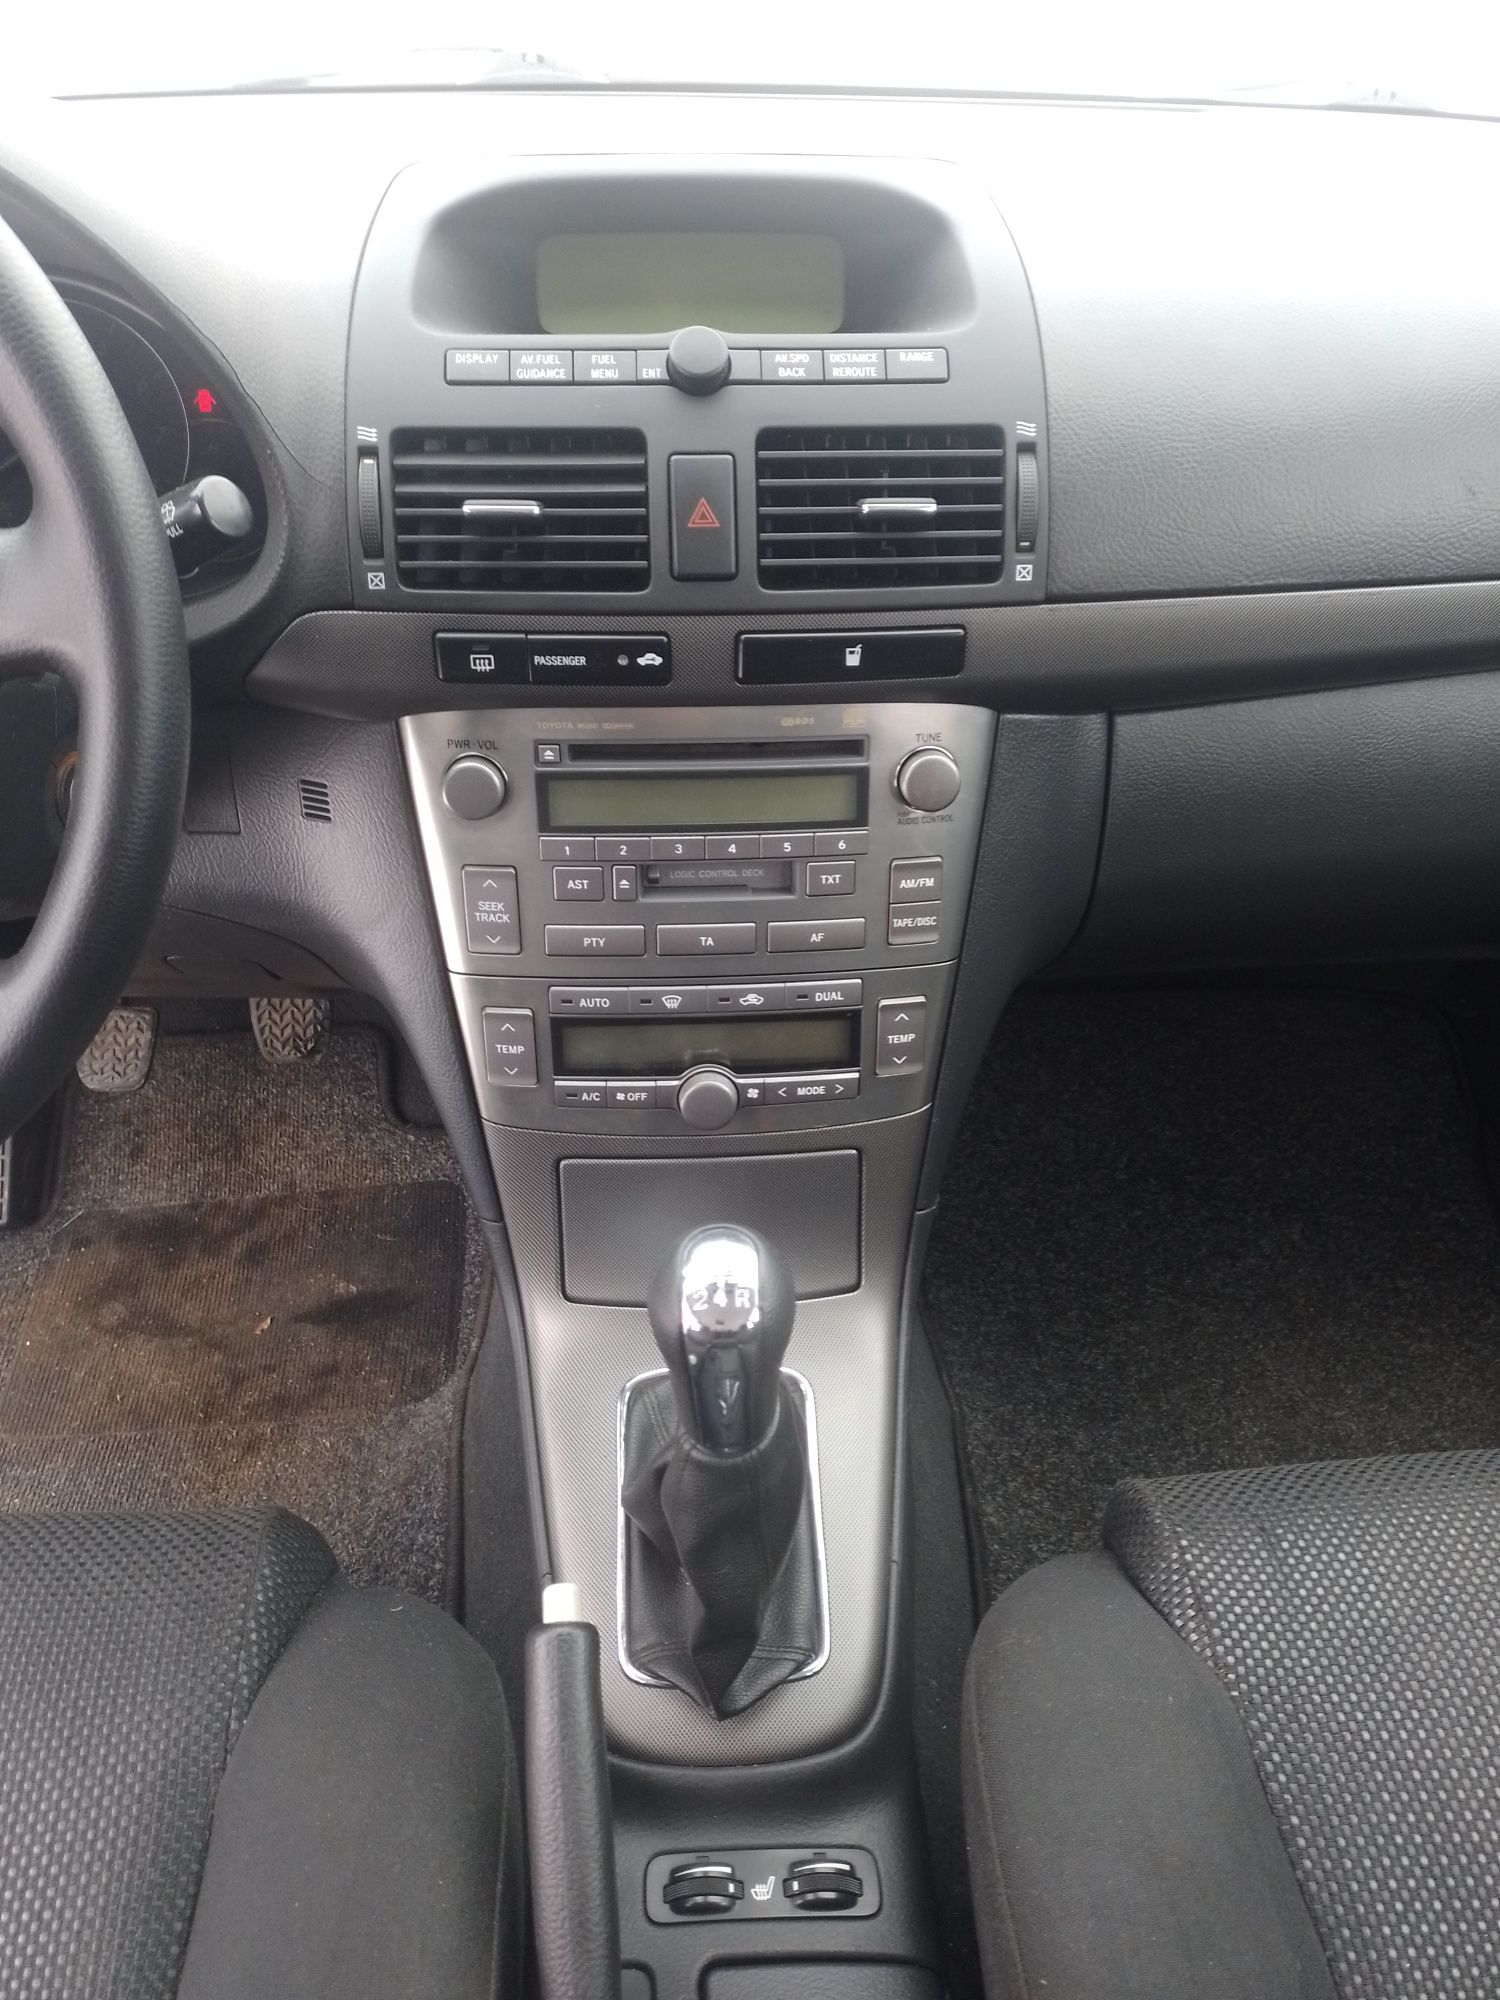 Toyota Avensis t25 1.8